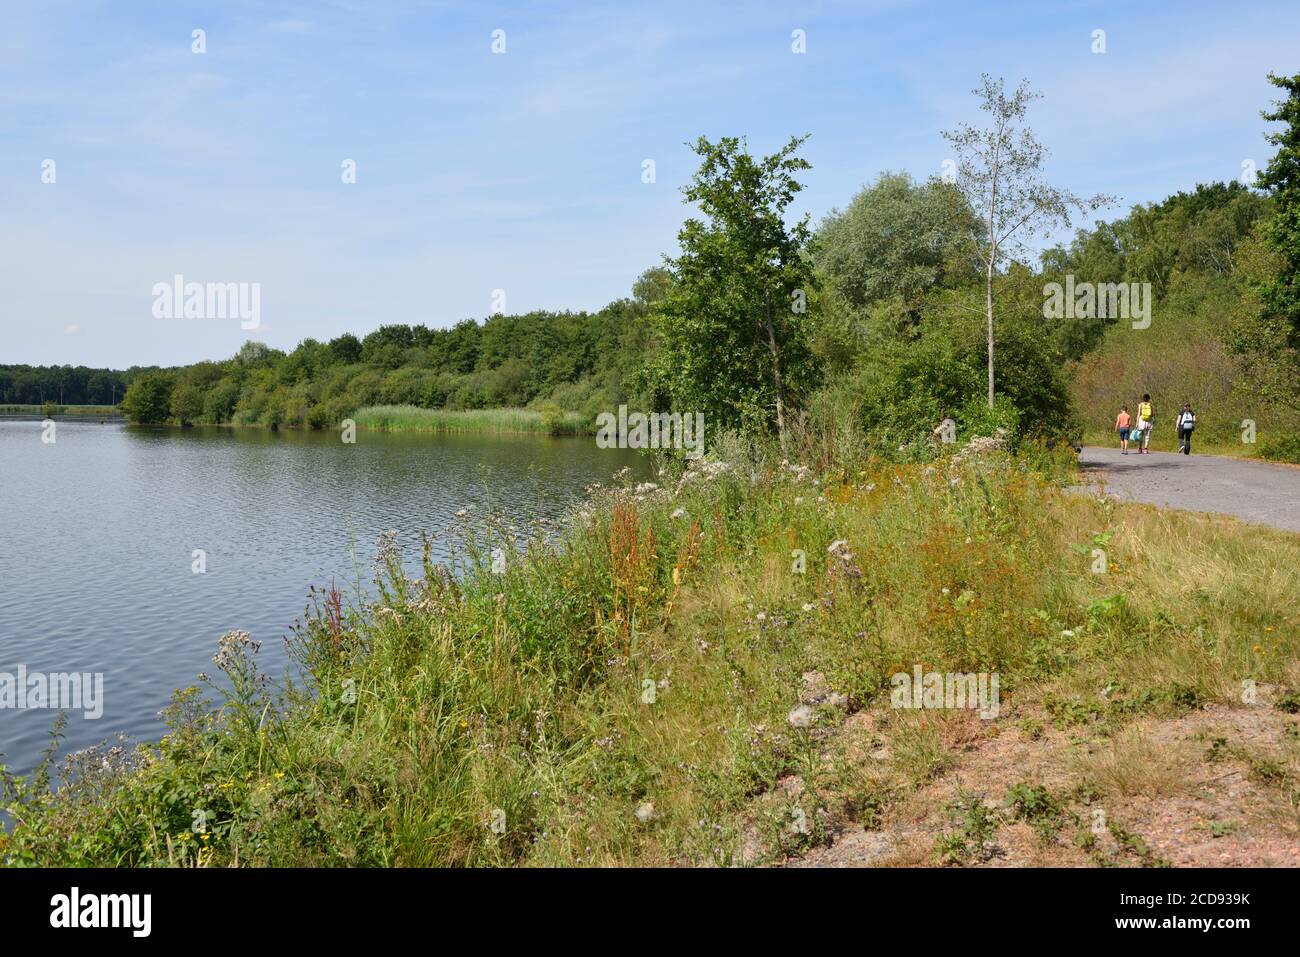 France, Nord, Raismes, three people walking on a path along the banks of the water Stock Photo